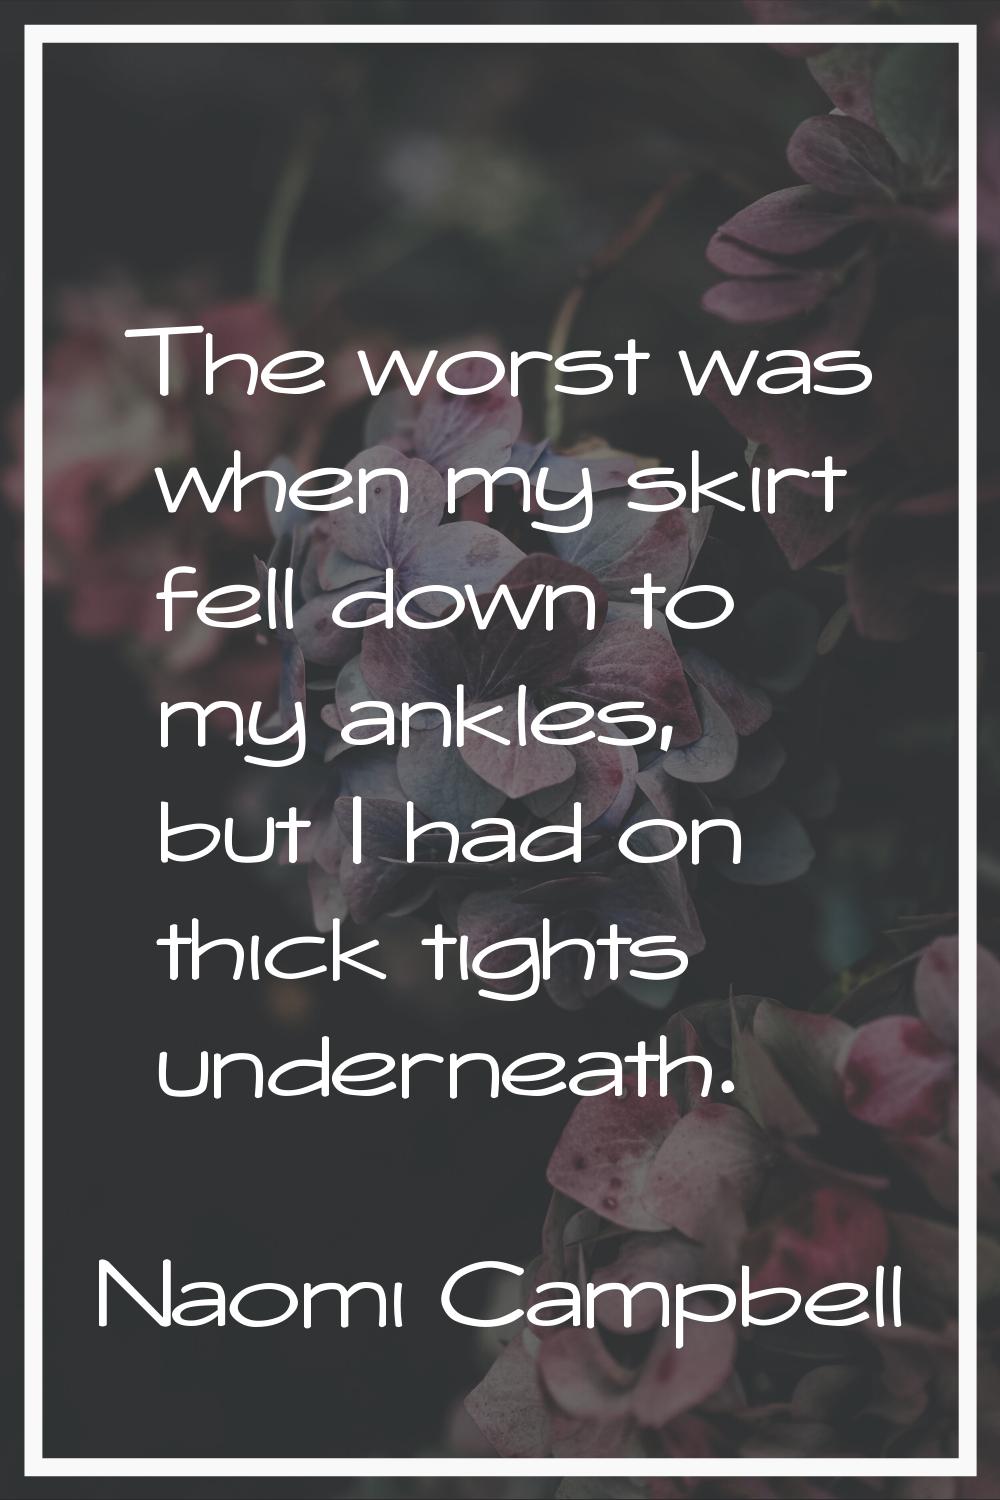 The worst was when my skirt fell down to my ankles, but I had on thick tights underneath.